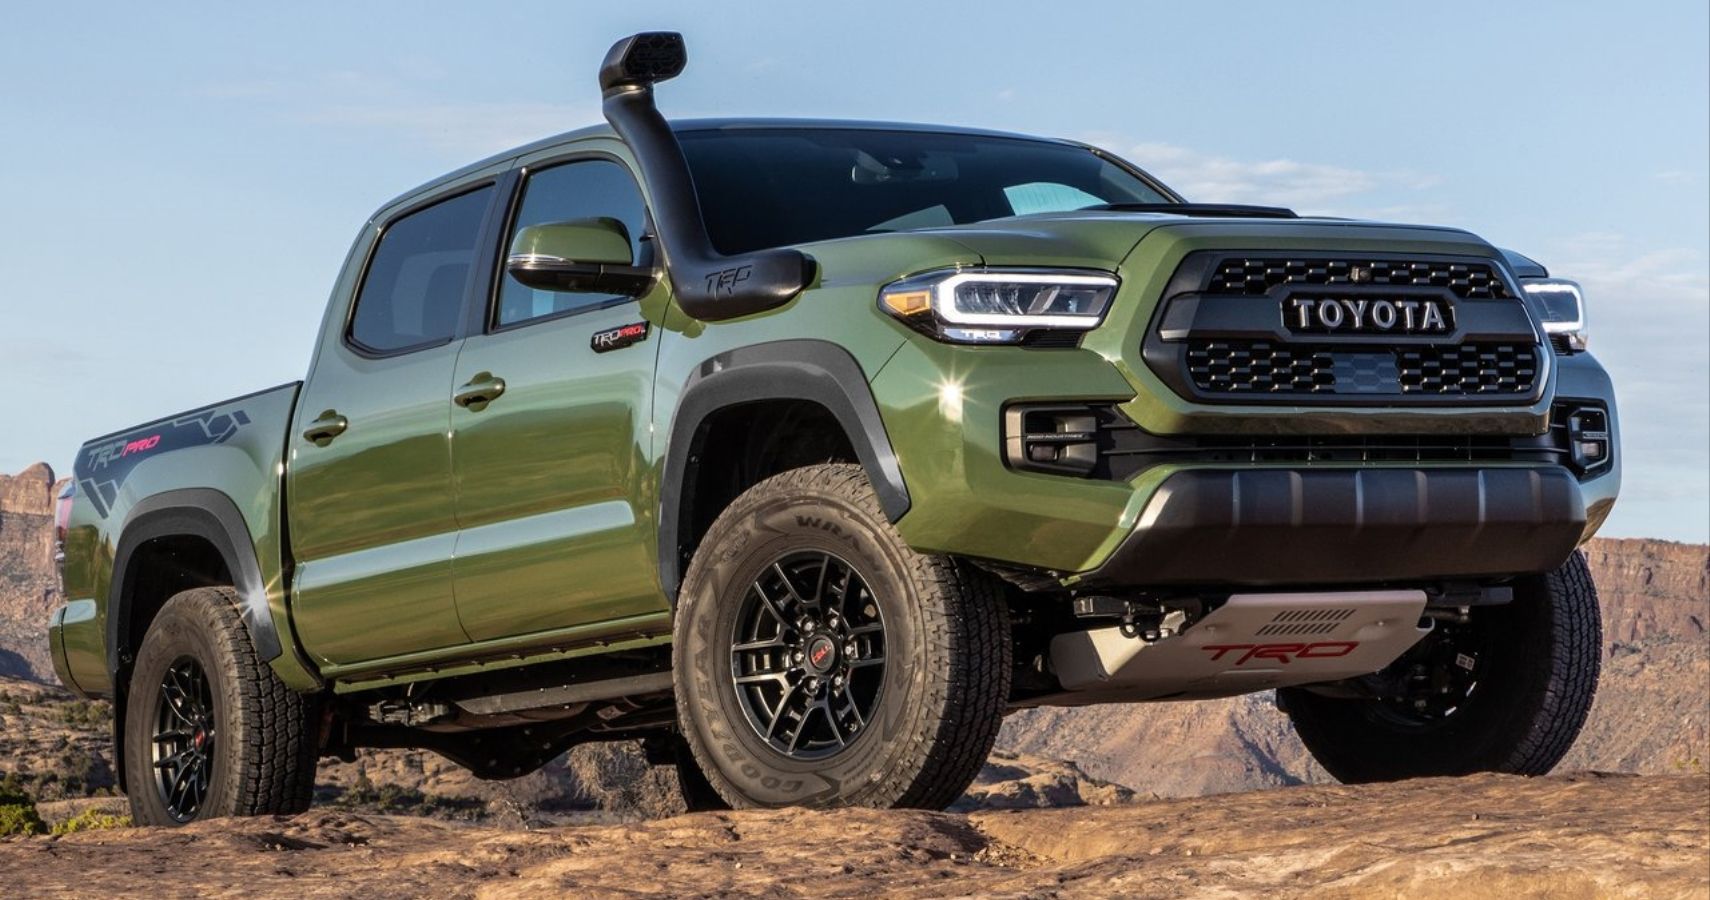 10 Reasons Why OffRoad Enthusiasts Should Consider Buying A Toyota